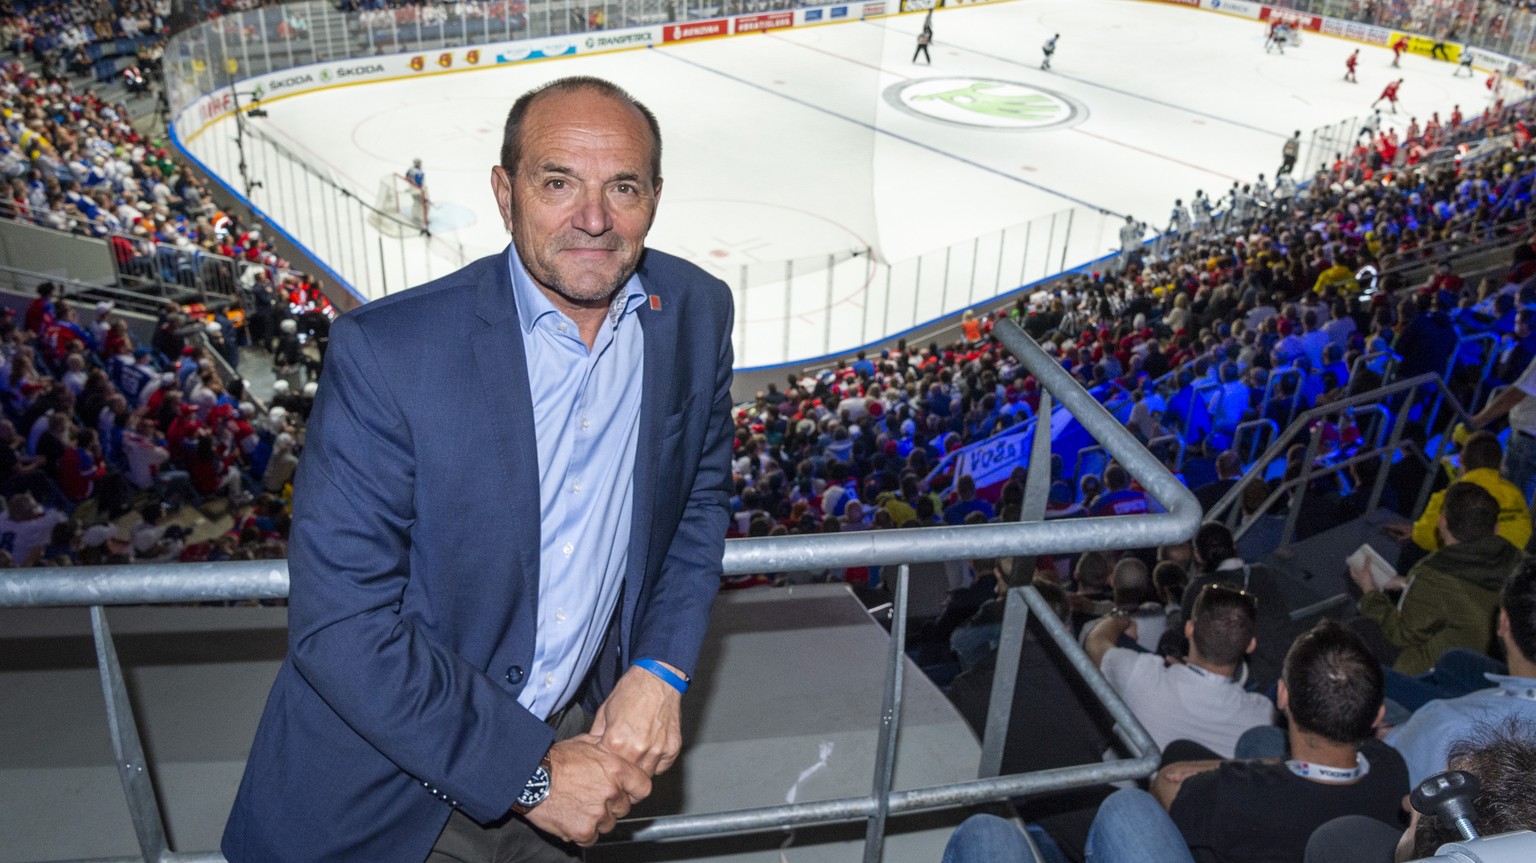 Gian Gilli, General Secretary IIFH 2020, during the semifinal game between Russia and Finland, at the IIHF 2019 World Ice Hockey Championships, at the Ondrej Nepela Arena in Bratislava, Slovakia, on S ...